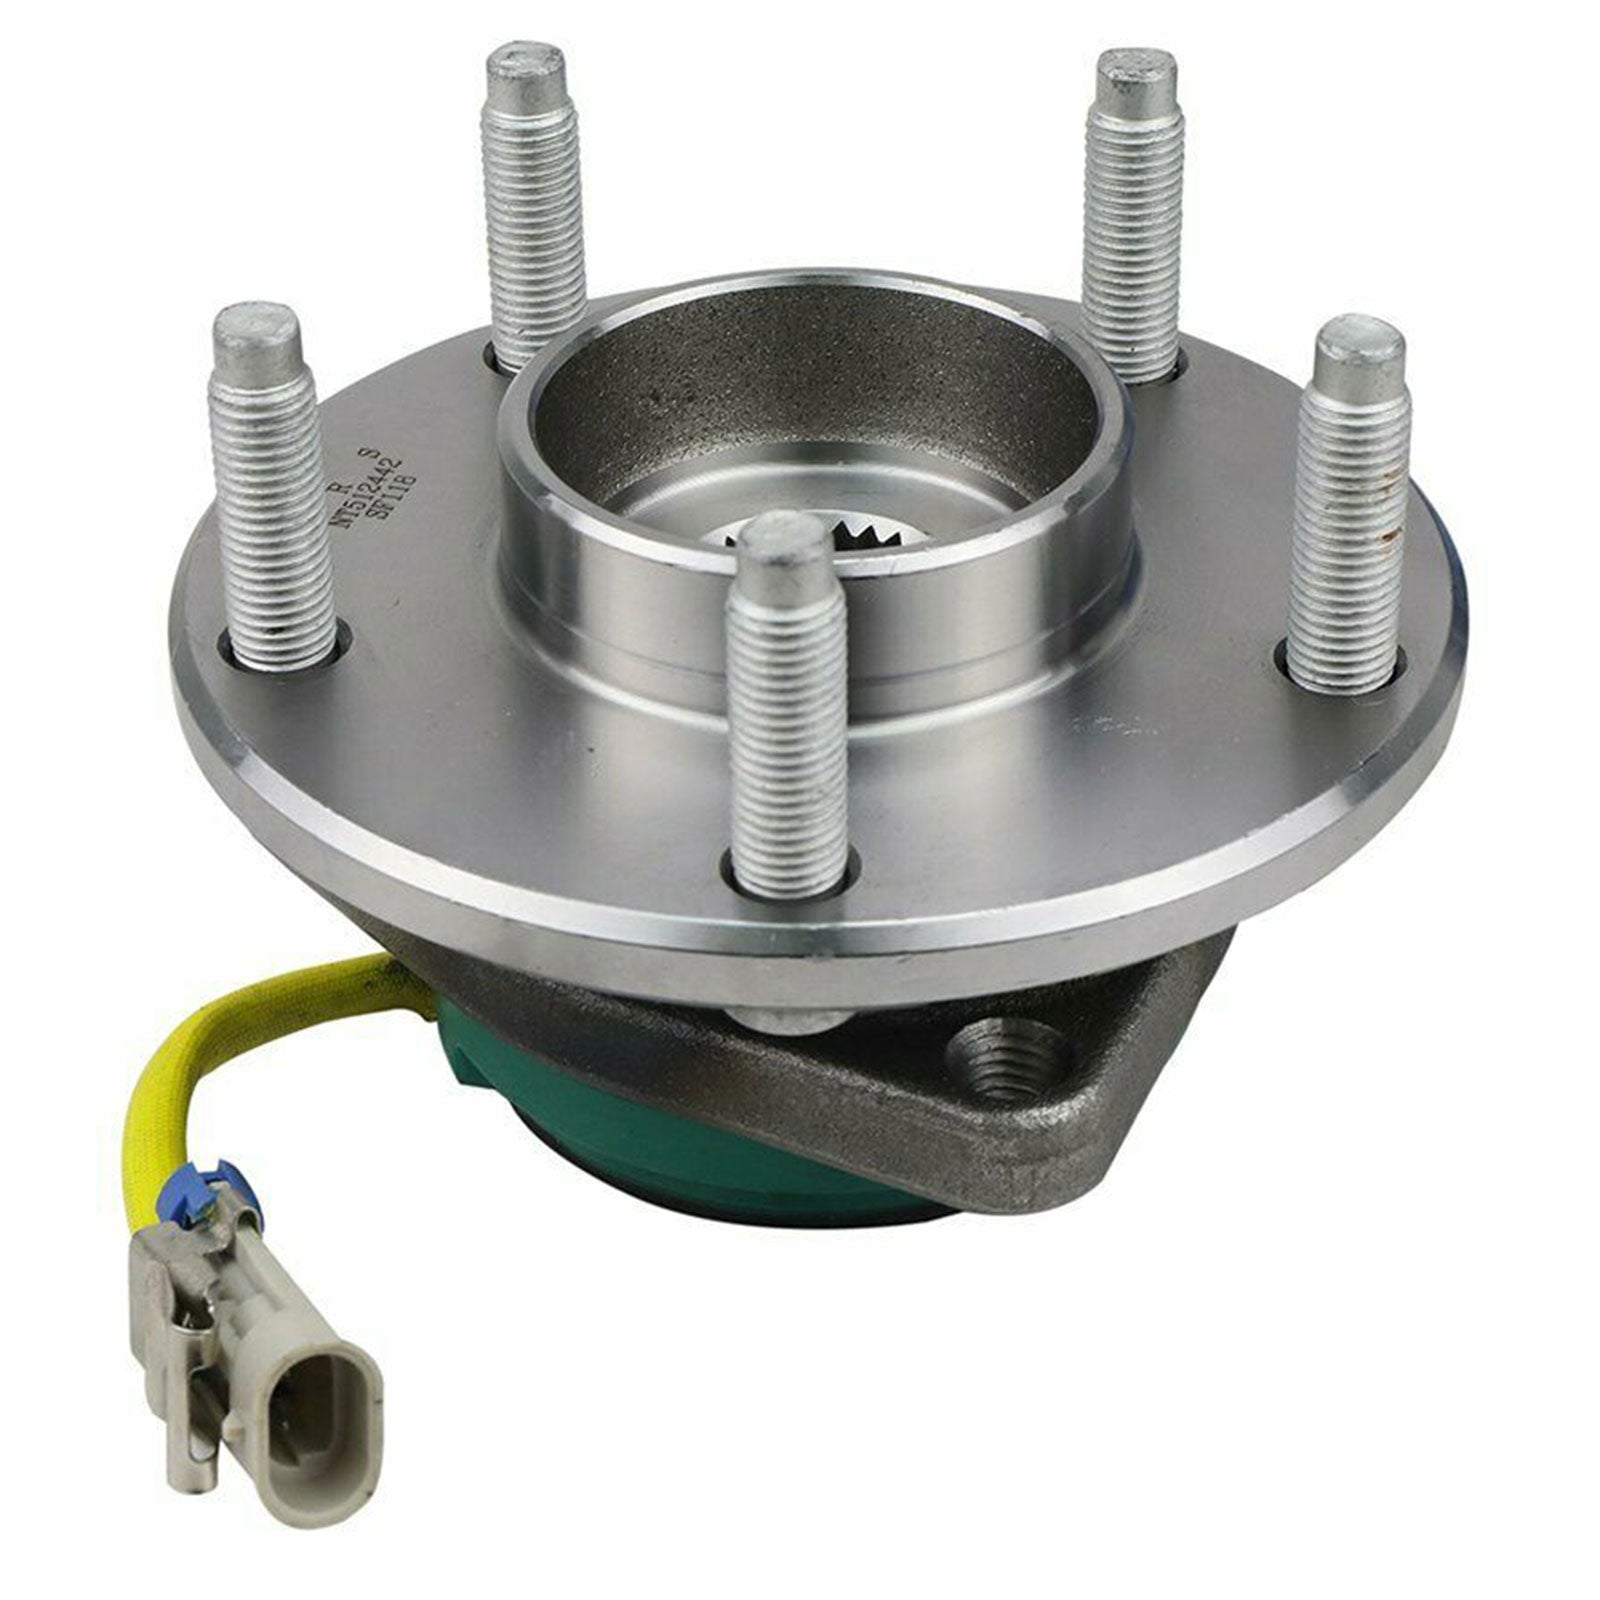 MotorbyMotor 512442 Rear Wheel Bearing and Hub Assembly w/5 Lugs Fits for Chevy Corvette 2009-2013 Low-Runout OE Directly Replacement Hub Bearing MotorbyMotor